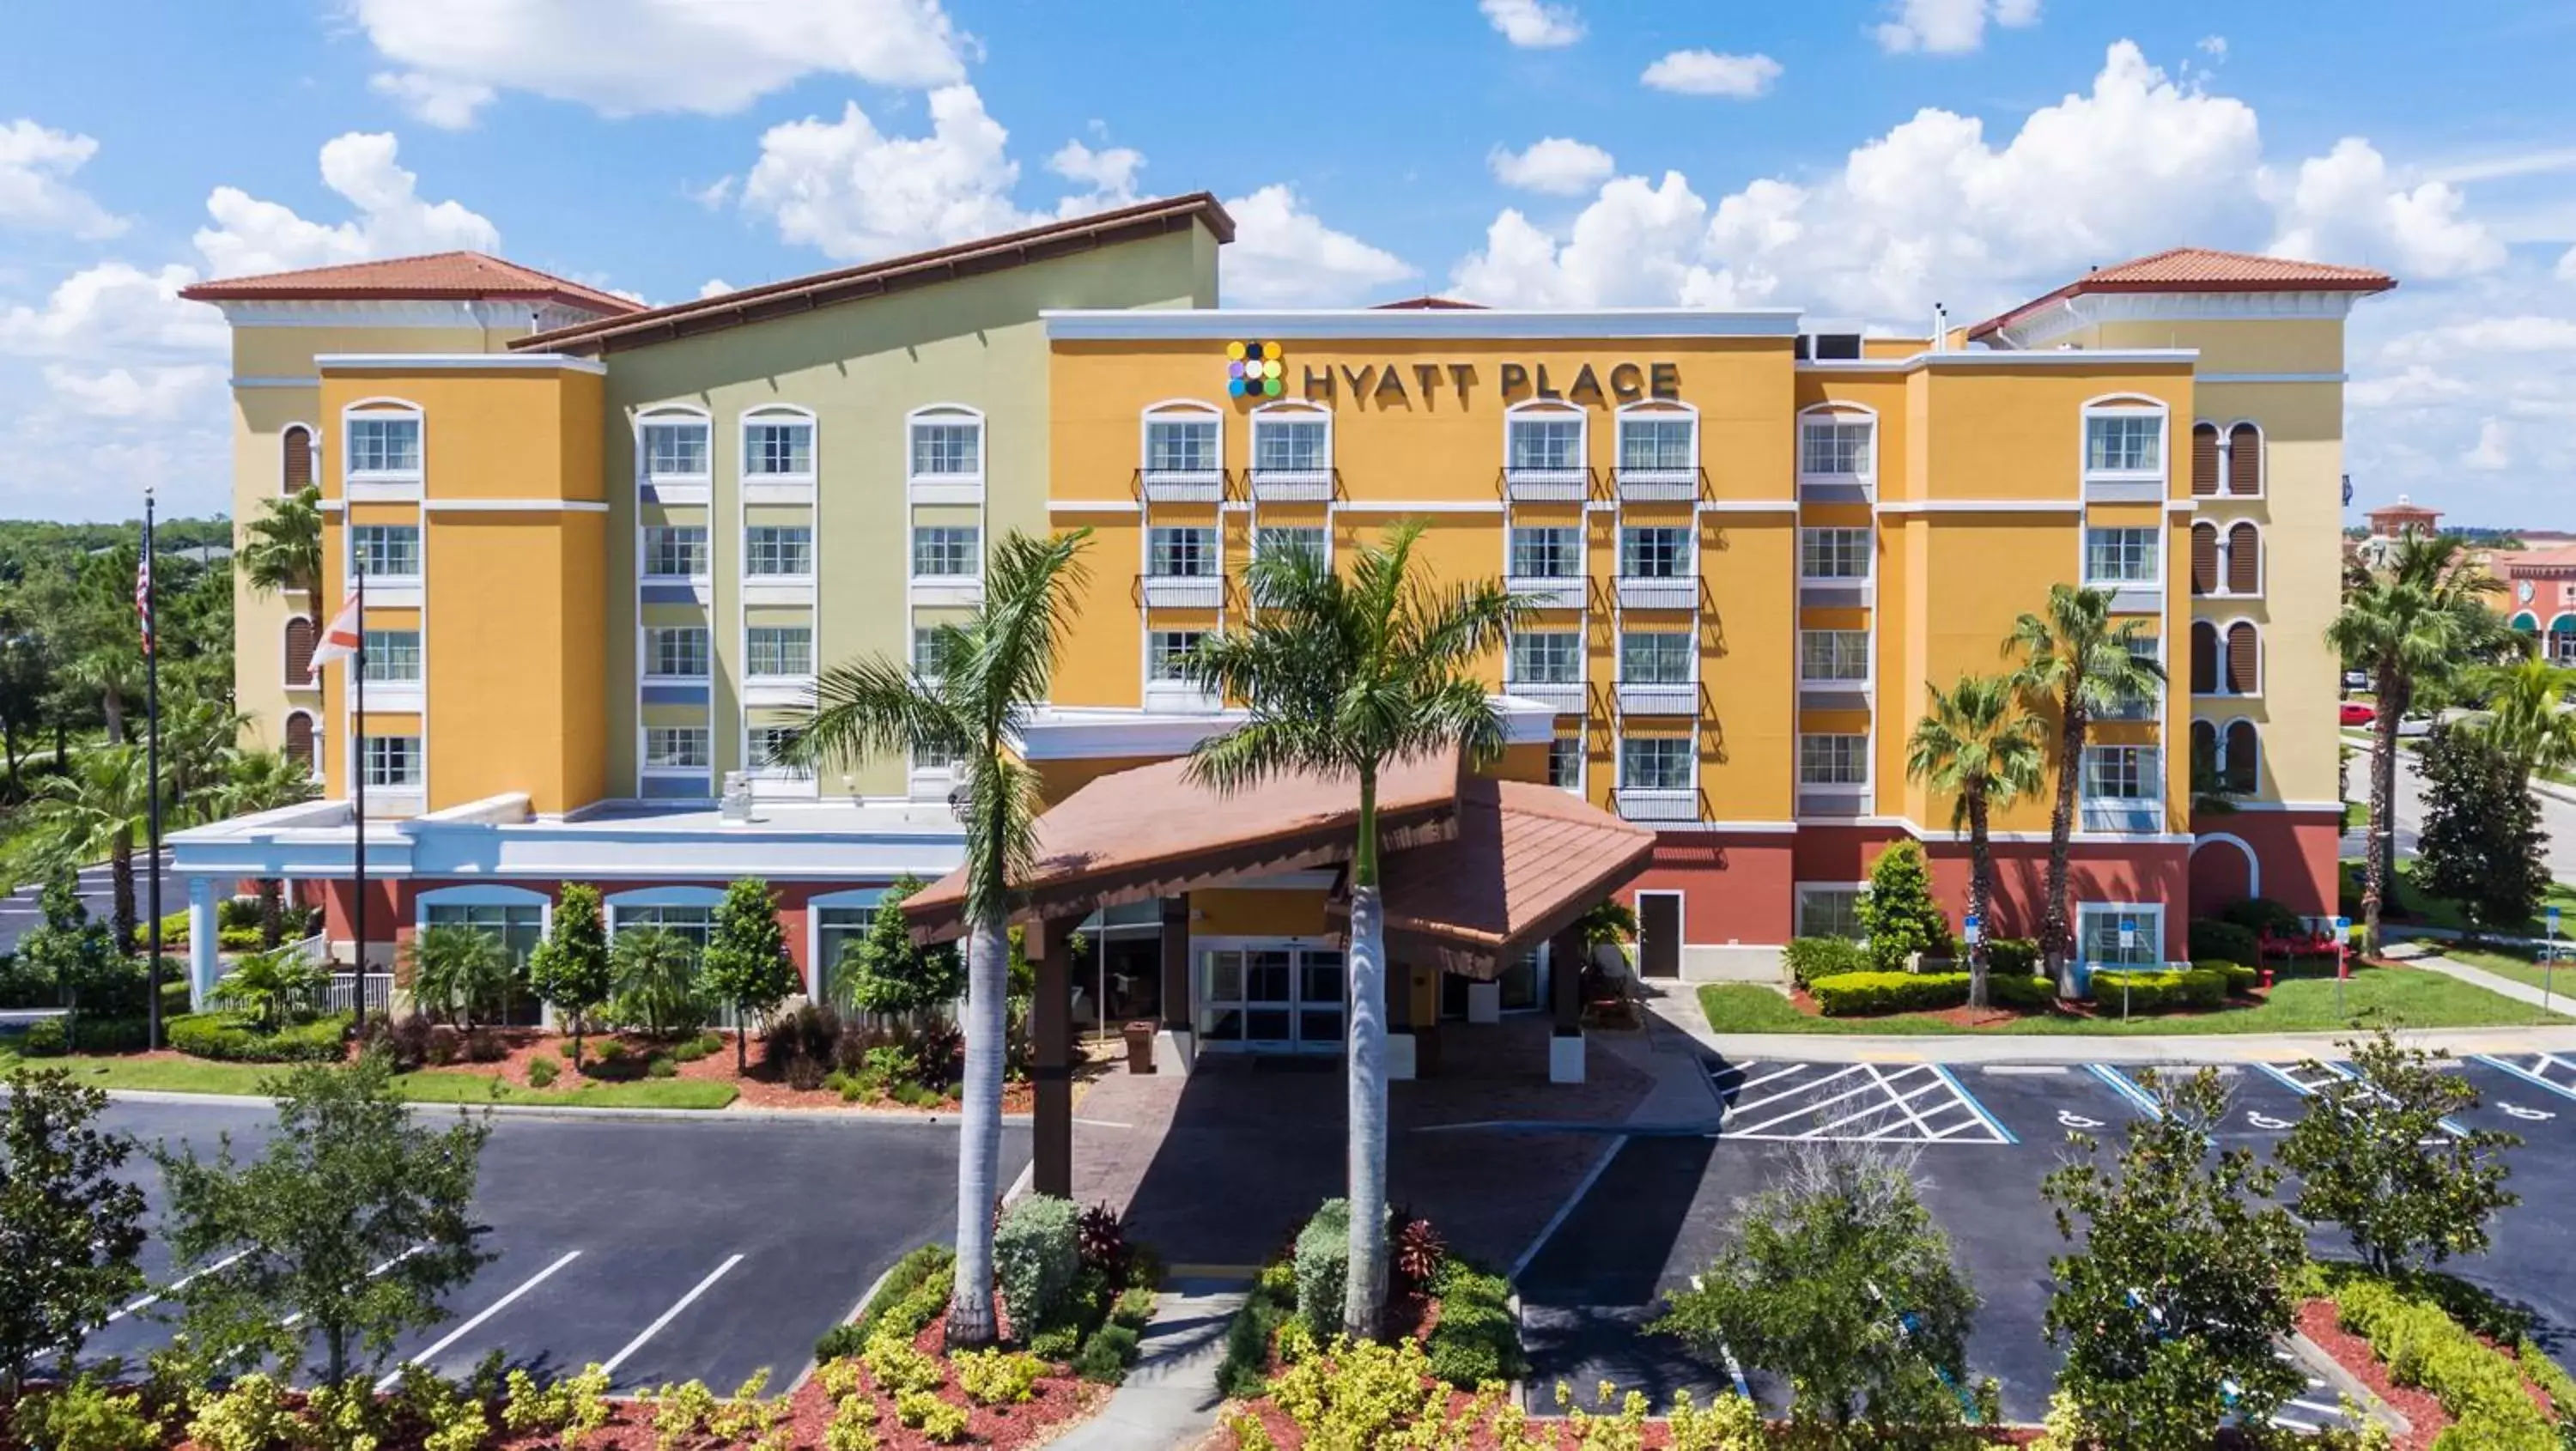 Property Building in Hyatt Place Coconut Point